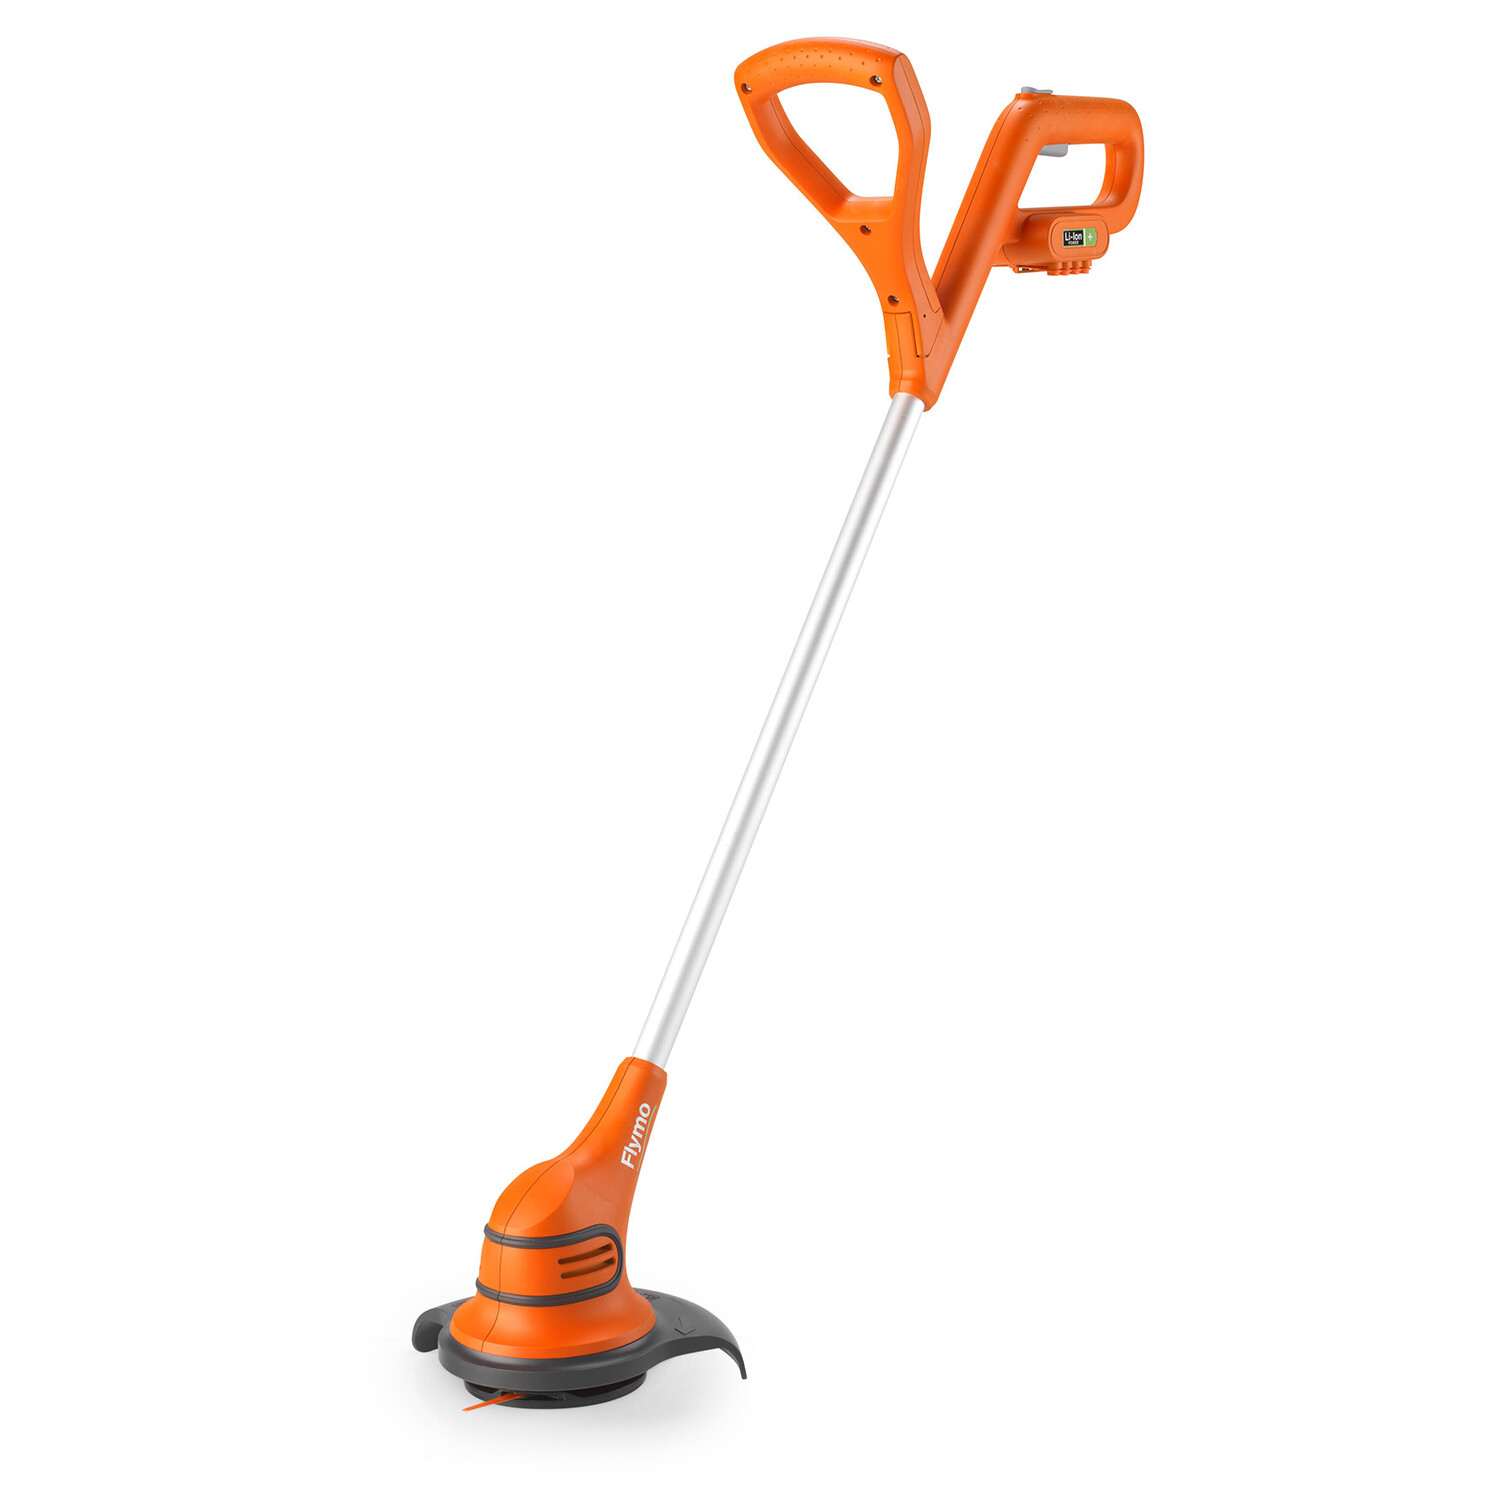 Flymo SimpliTrim Hand Propelled 23cm Grass Trimmer Image 2